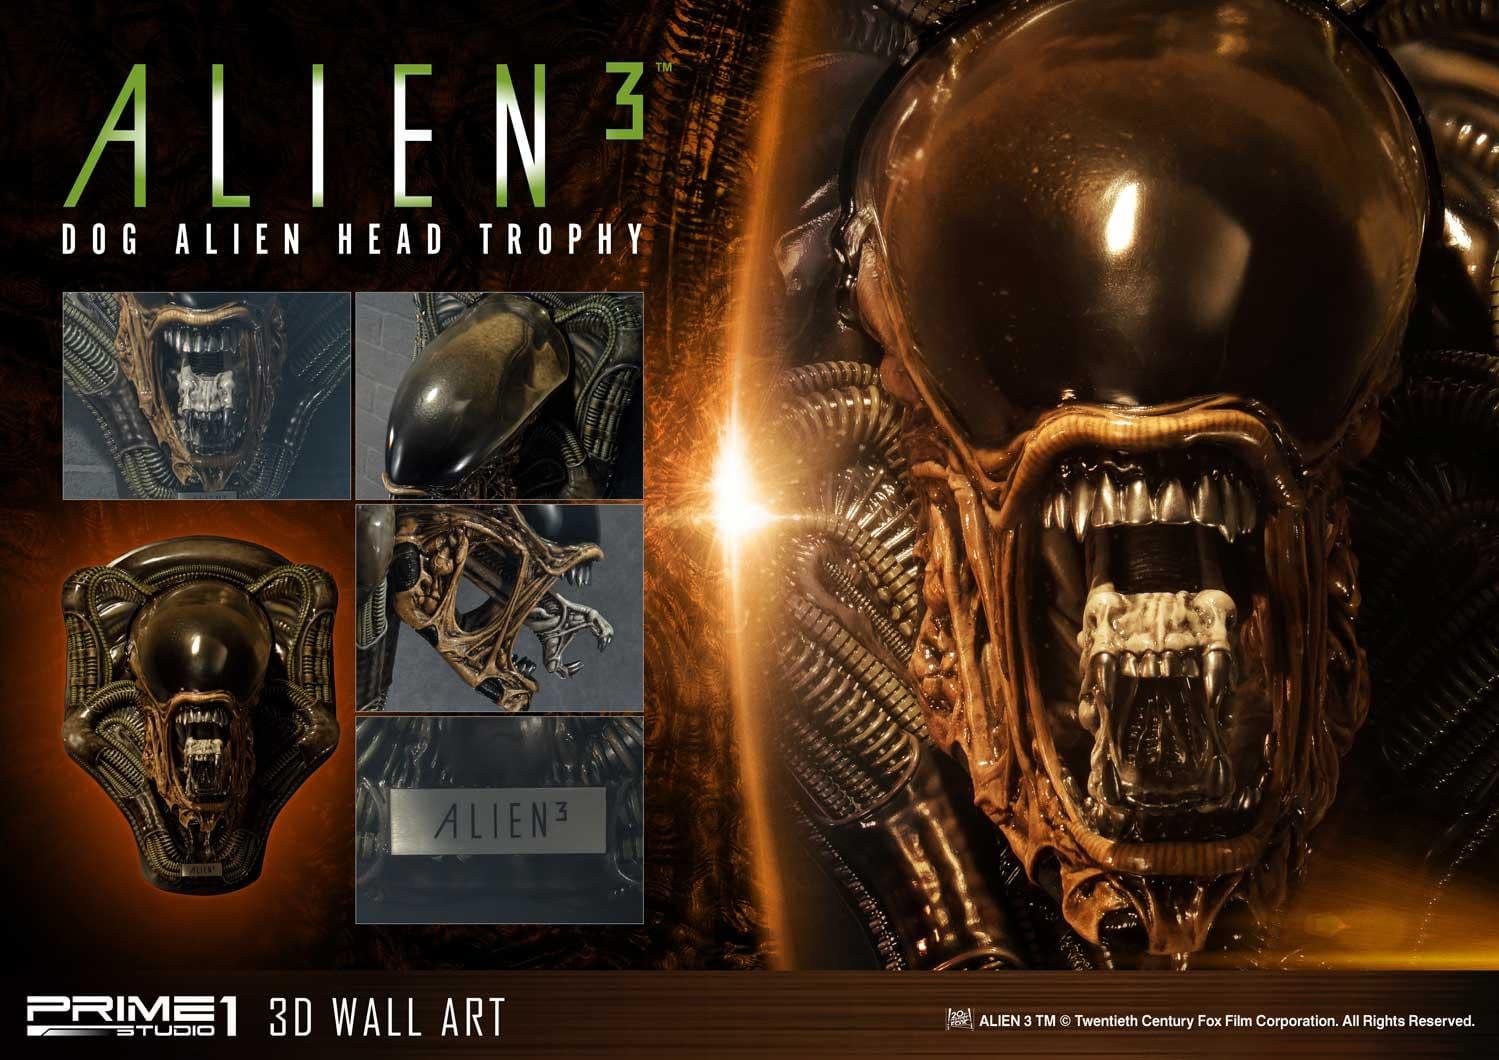 Alien 3 Dog Head Trophy Mounts Available from Prime 1 Studio